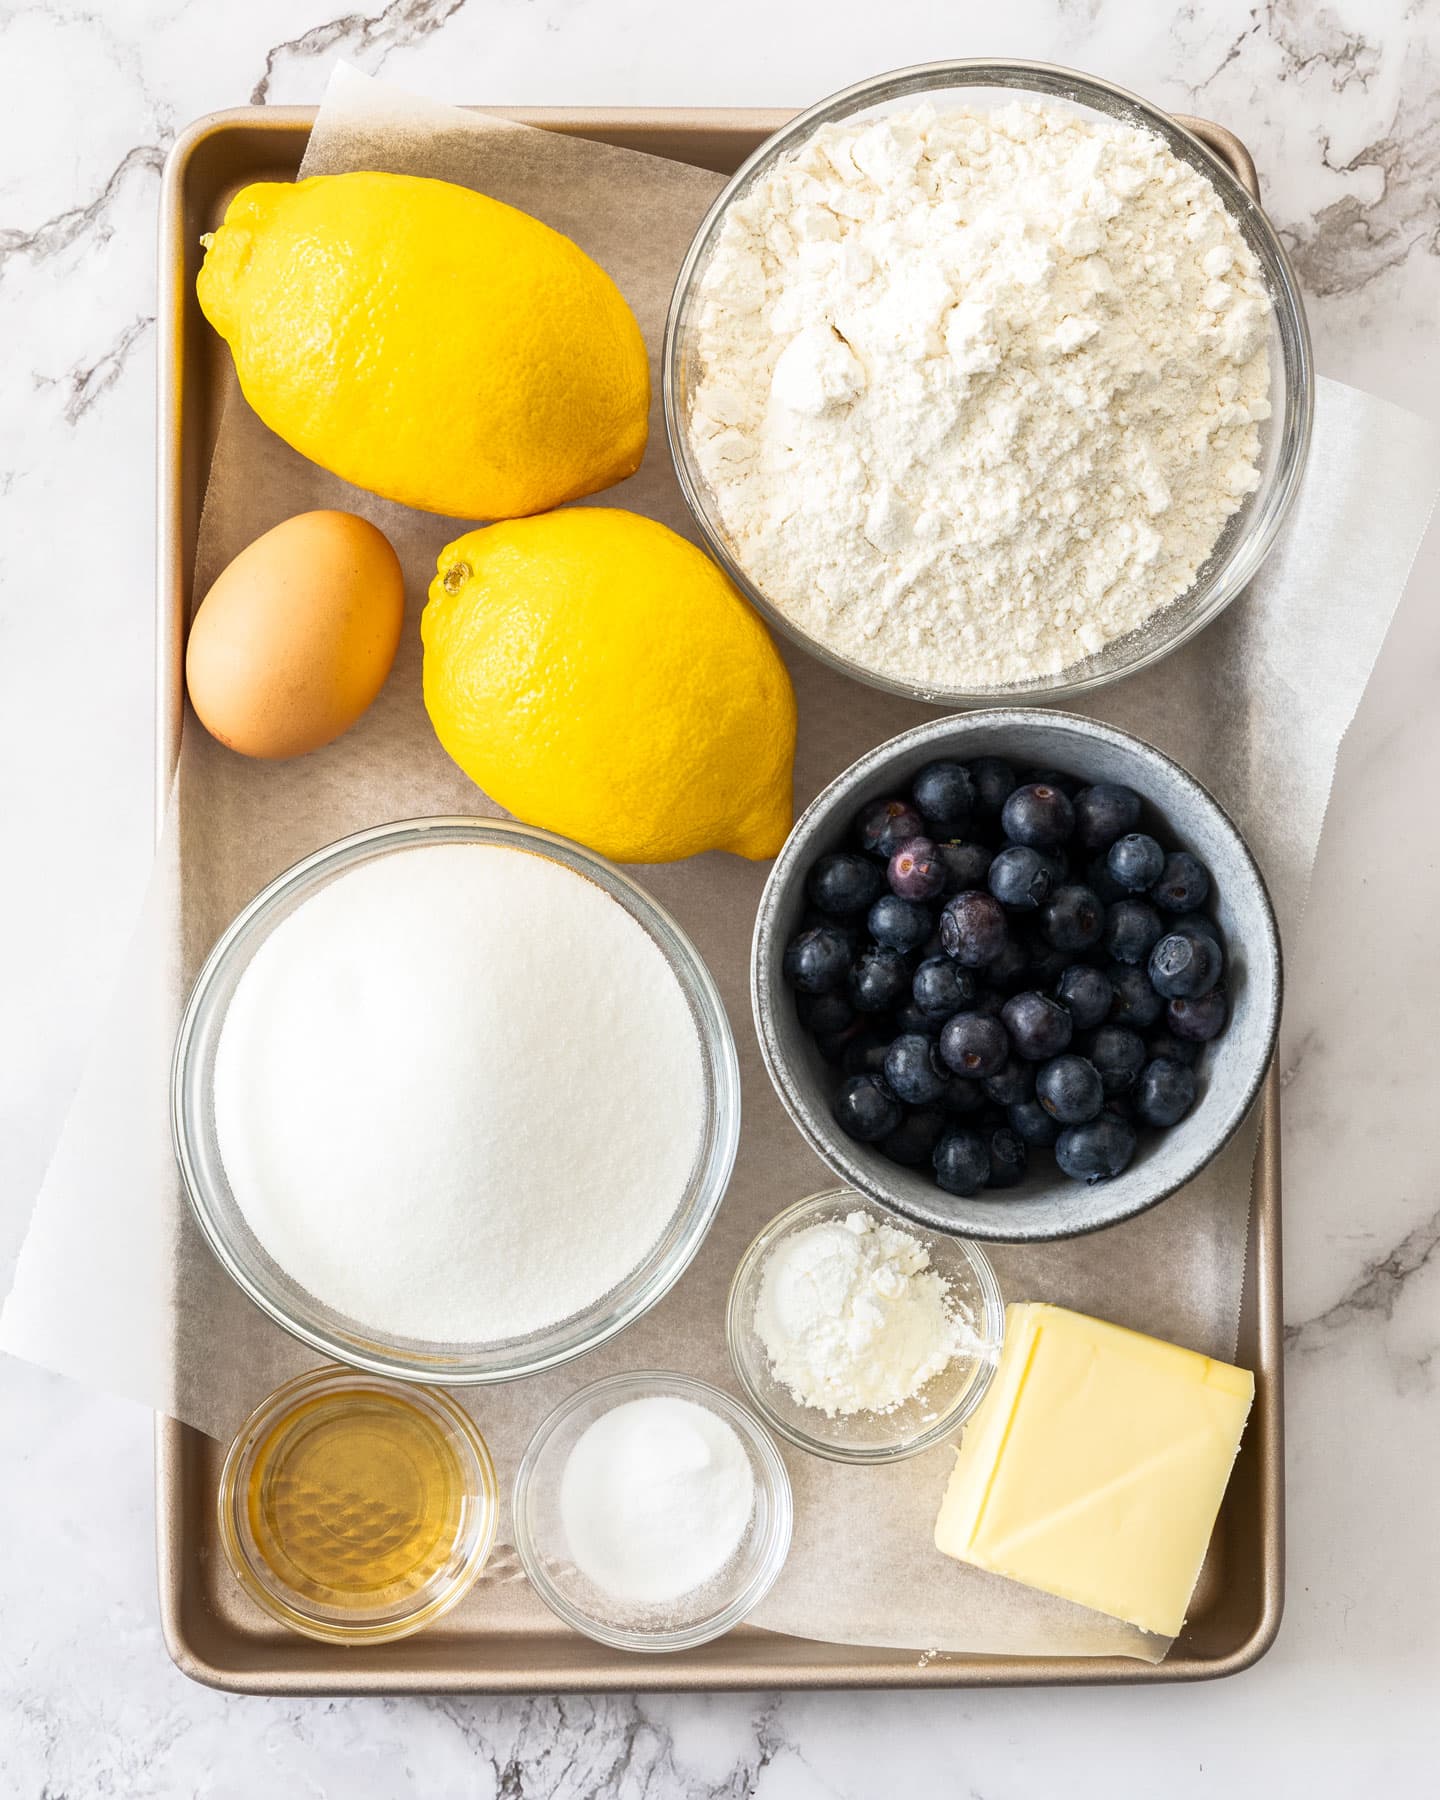 Ingredients for lemon blueberry cookies on a baking tray.